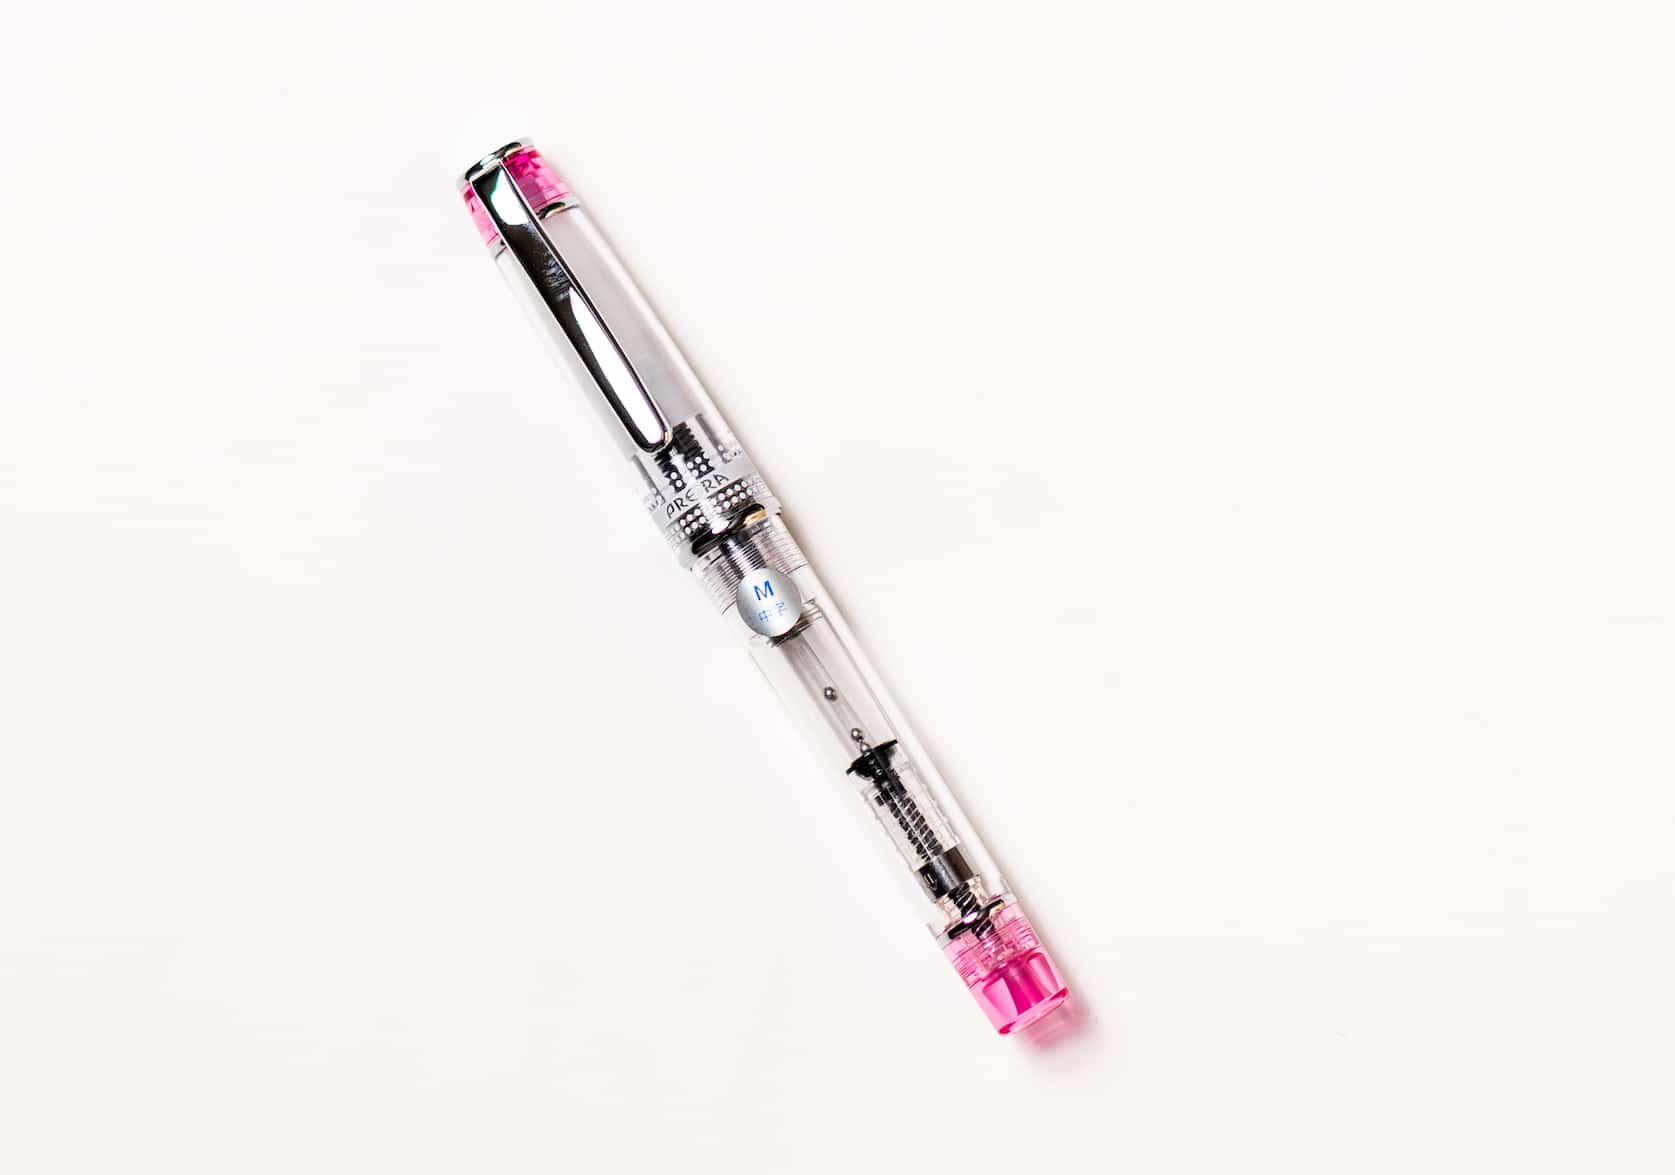 Transparent fountain pen with silver pen clip. Tinted pink details on the top of the pen cap and bottom of the barrel